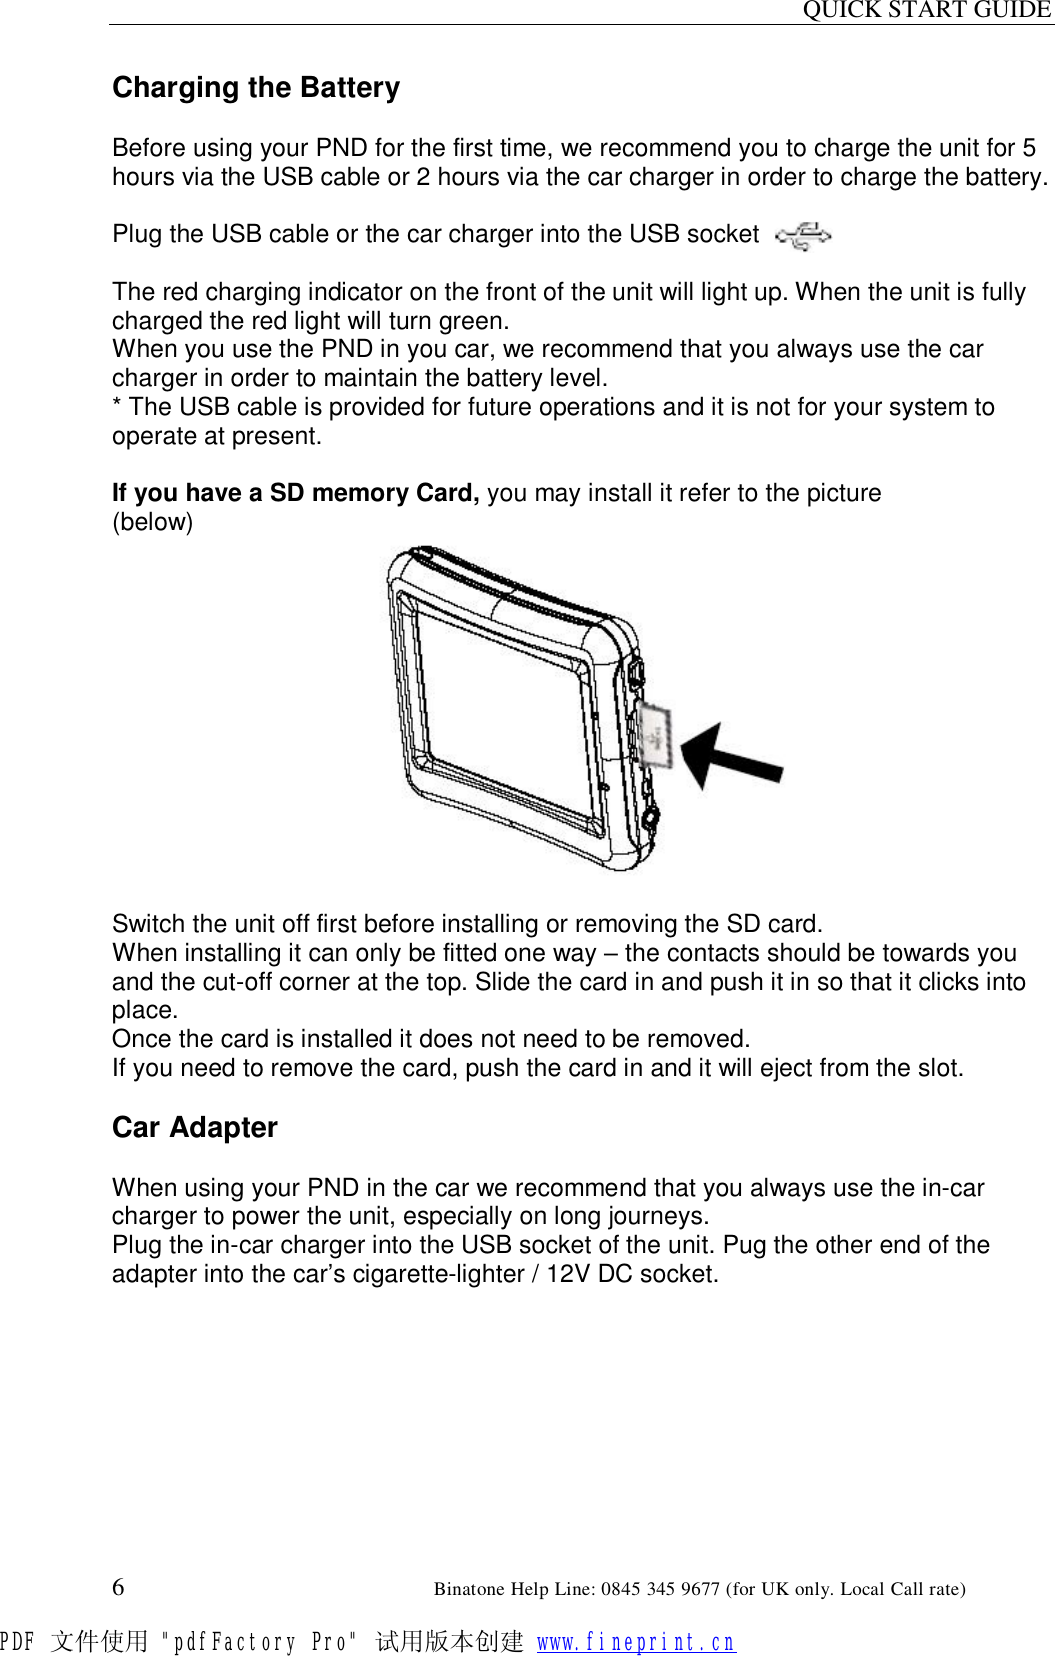 QUICK START GUIDE  6                                                        Binatone Help Line: 0845 345 9677 (for UK only. Local Call rate) Charging the Battery  Before using your PND for the first time, we recommend you to charge the unit for 5 hours via the USB cable or 2 hours via the car charger in order to charge the battery.  Plug the USB cable or the car charger into the USB socket       .  The red charging indicator on the front of the unit will light up. When the unit is fully charged the red light will turn green. When you use the PND in you car, we recommend that you always use the car charger in order to maintain the battery level. * The USB cable is provided for future operations and it is not for your system to operate at present.  If you have a SD memory Card, you may install it refer to the picture (below)   Switch the unit off first before installing or removing the SD card. When installing it can only be fitted one way – the contacts should be towards you and the cut-off corner at the top. Slide the card in and push it in so that it clicks into place. Once the card is installed it does not need to be removed. If you need to remove the card, push the card in and it will eject from the slot.  Car Adapter  When using your PND in the car we recommend that you always use the in-car charger to power the unit, especially on long journeys. Plug the in-car charger into the USB socket of the unit. Pug the other end of the adapter into the car’s cigarette-lighter / 12V DC socket.  PDF 文件使用 &quot;pdfFactory Pro&quot; 试用版本创建 www.fineprint.cn